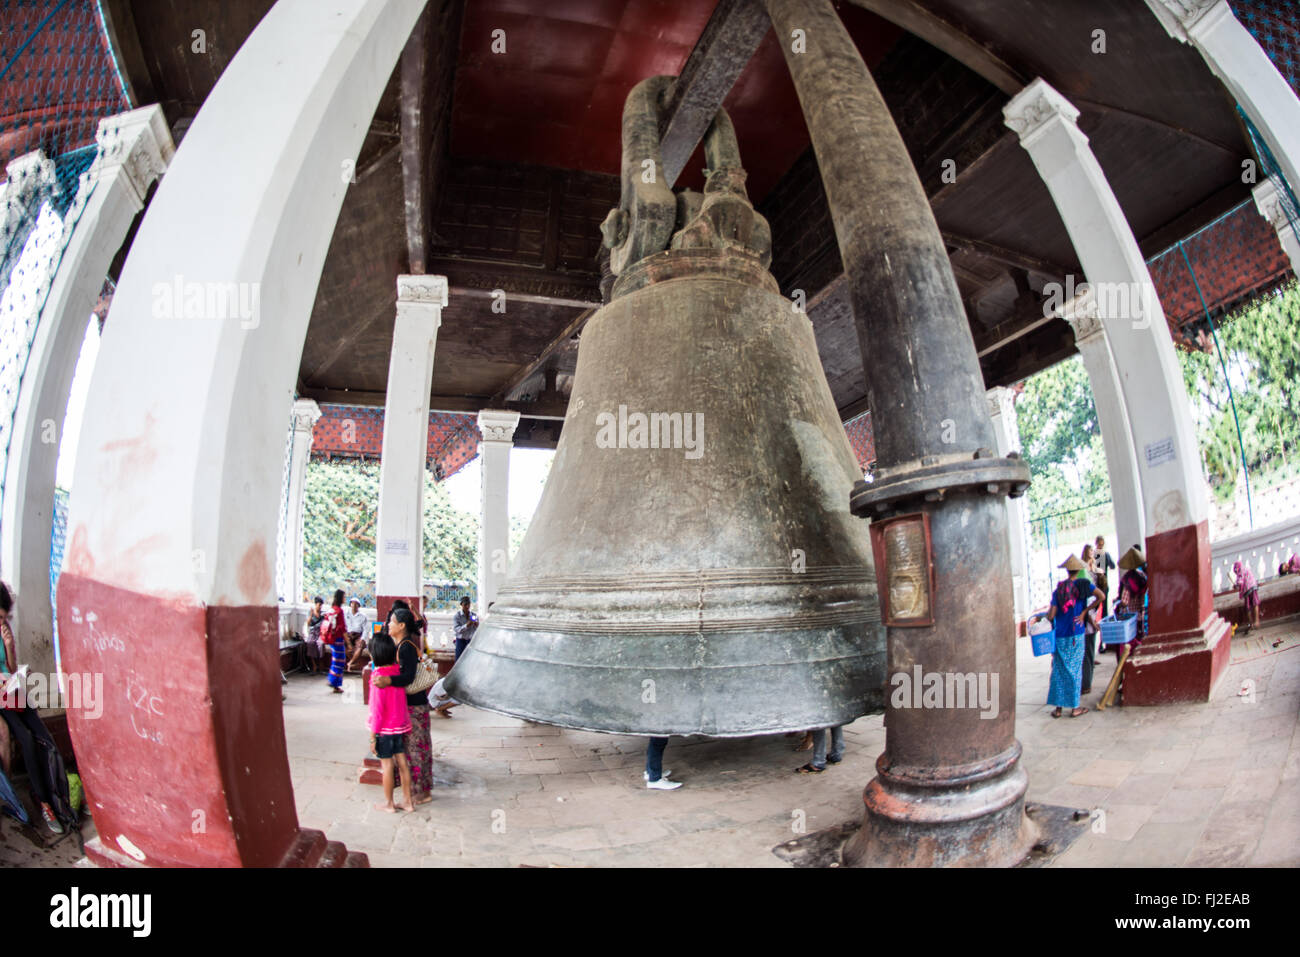 MINGUN, Myanmar - Weighing about 90 tons and reputed to be the largest uncracked bell in the world (a larger one in Moscow is cracked), the Mingun Bell was cast in 1808 by King Bodawpaya for the Mingun Pagoda, which was never completed. The diameter of its base is 16 feet 3 inches, and it is 12 feet high. Stock Photo